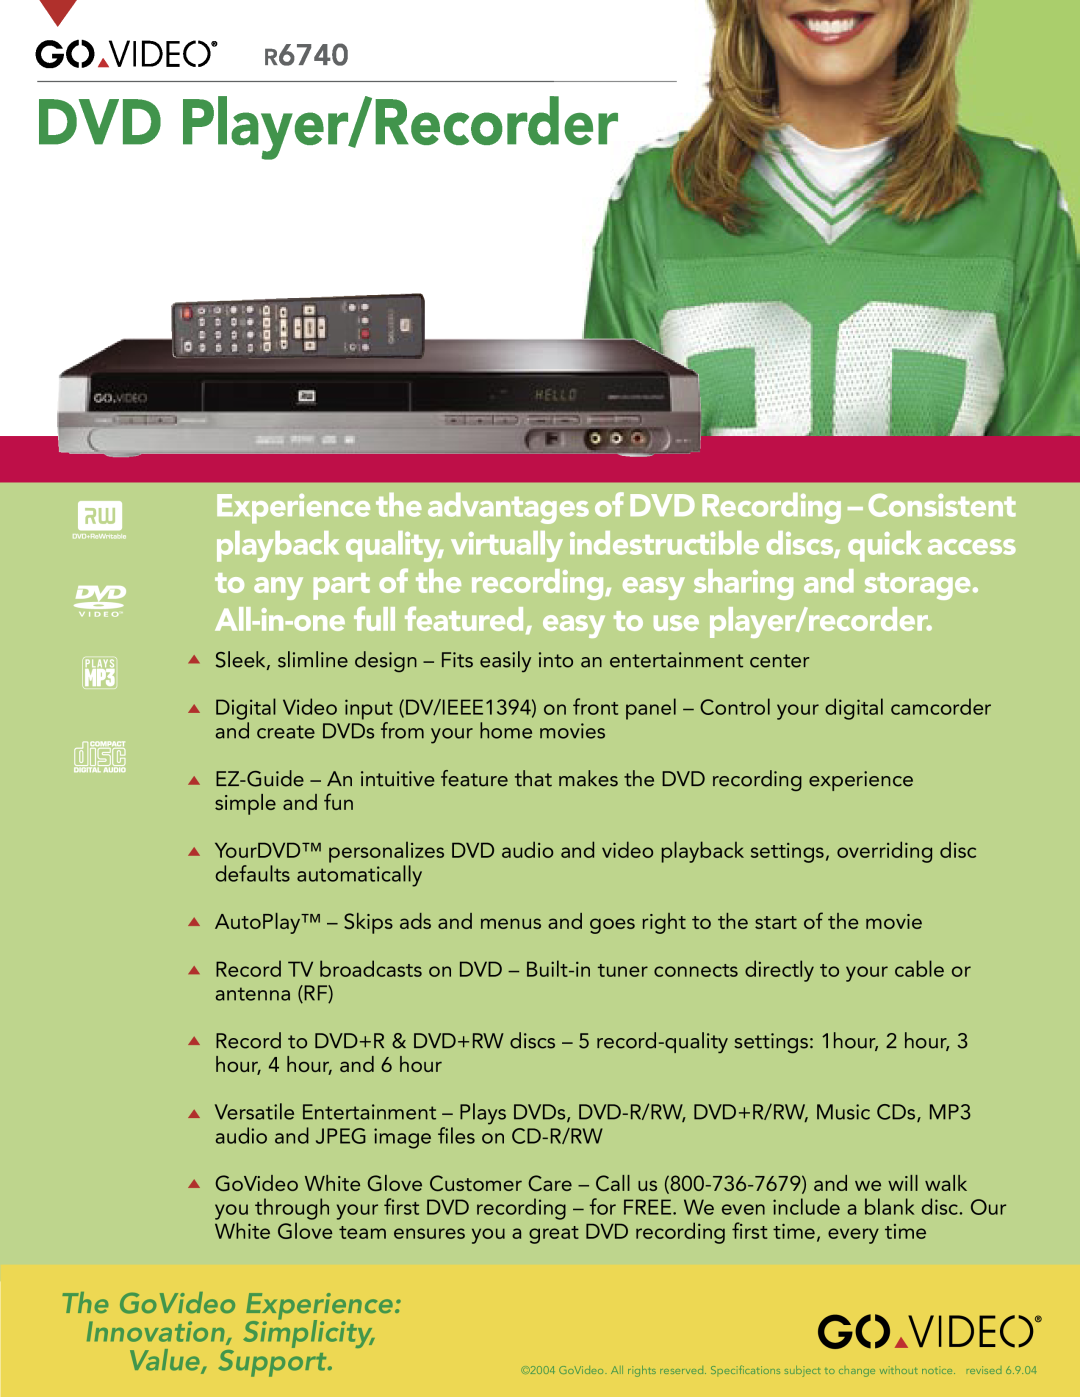 GoVideo R6740 specifications DVD Player/Recorder, All-in-one full featured, easy to use player/recorder 